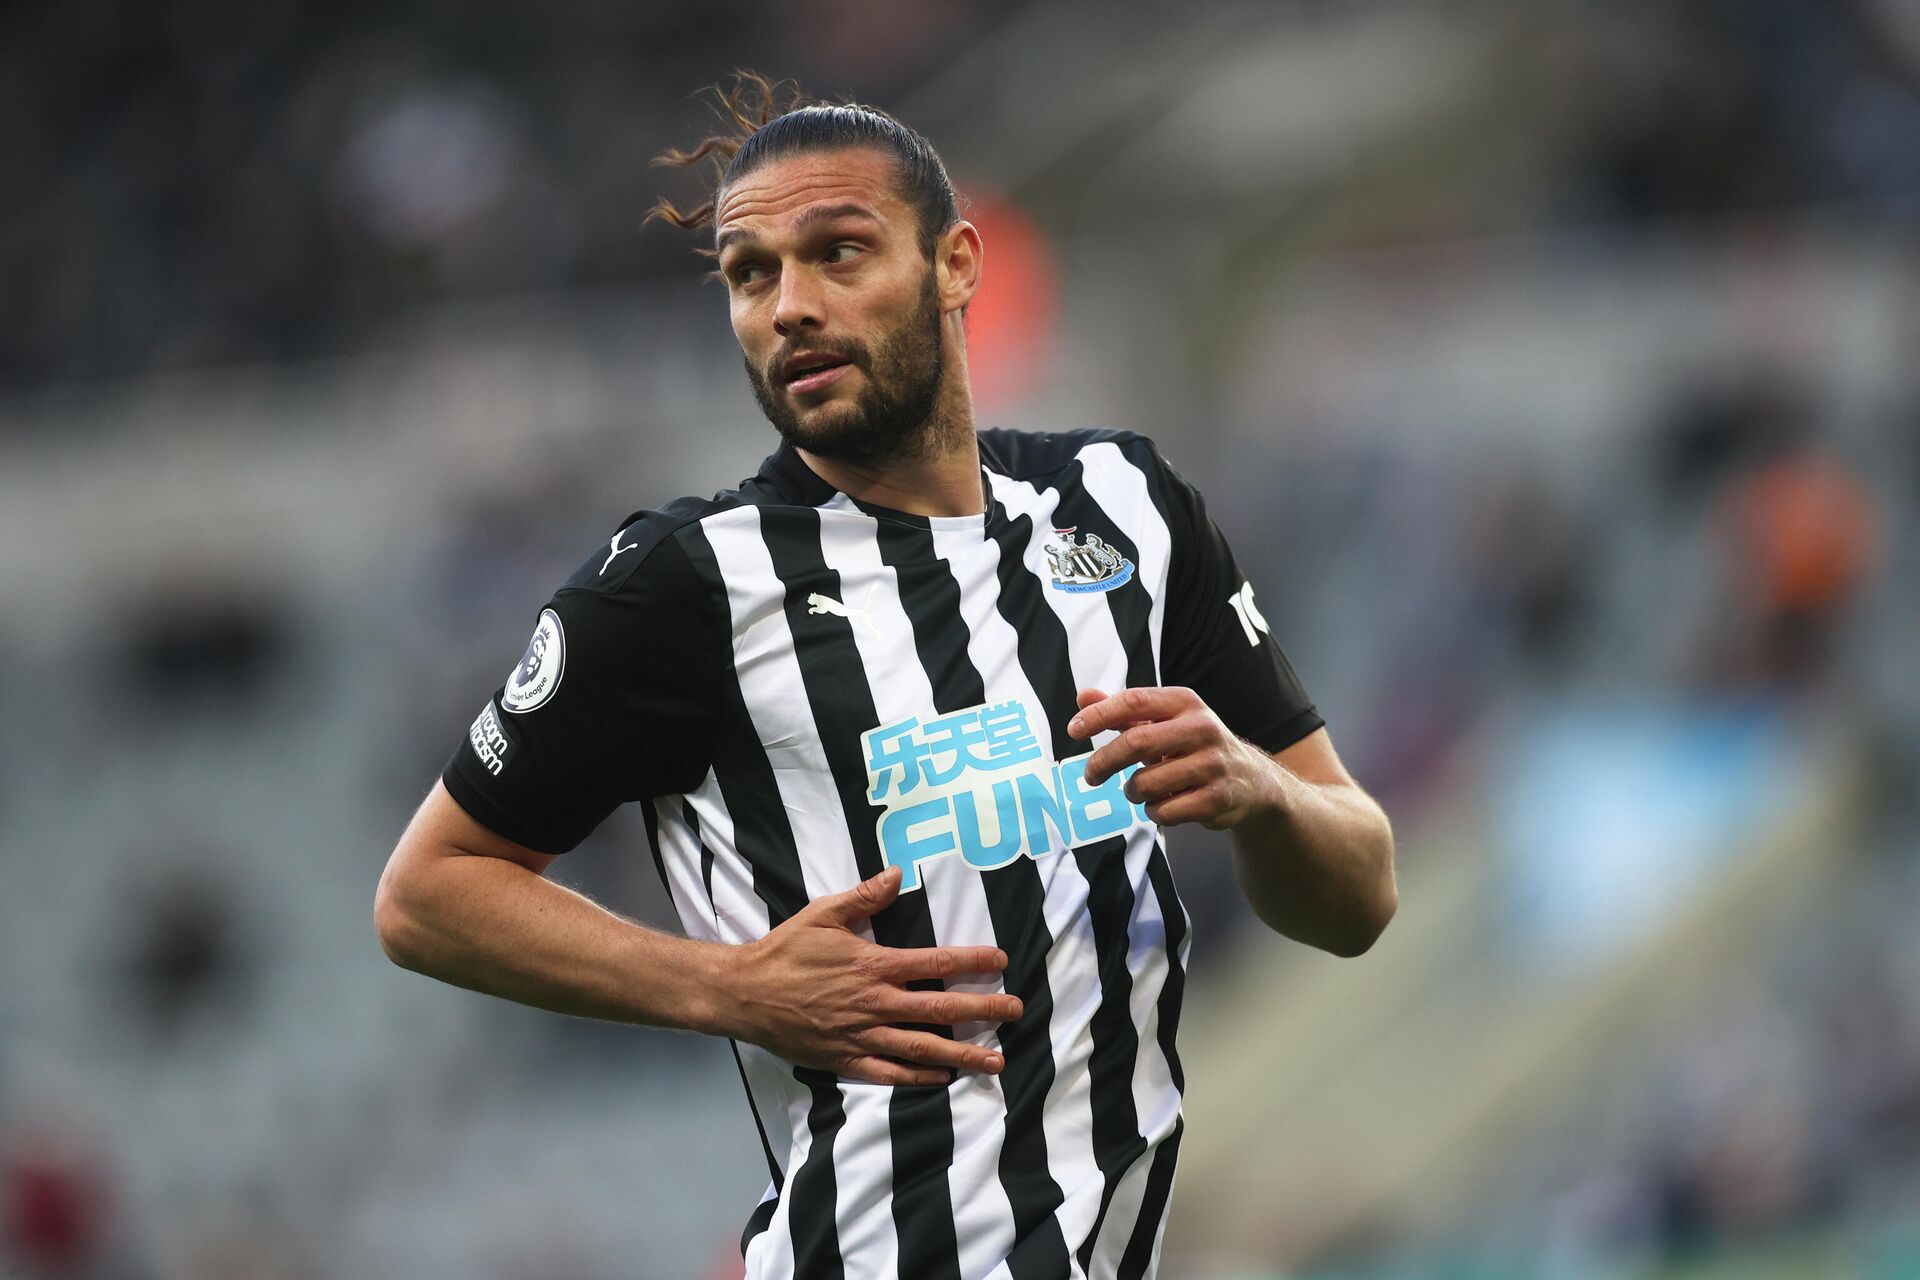 Newcastle's Andy Carroll runs during the English Premier League soccer match between Newcastle United and Sheffield United at St. James' Park in Newcastle, England, Wednesday, May 19, 2021 - Sputnik International, 1920, 24.12.2021